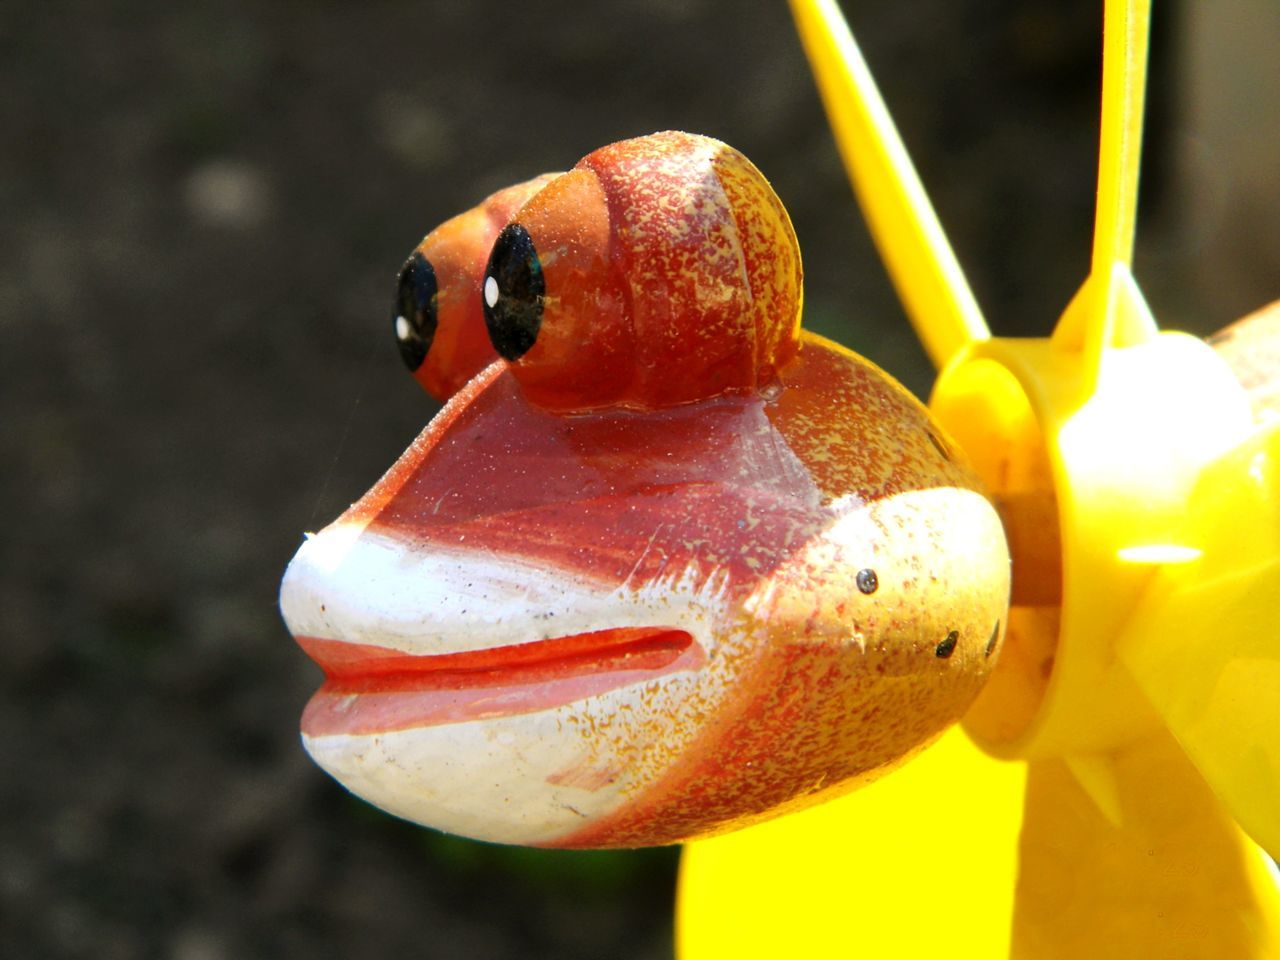 Close-up of frog shape toy